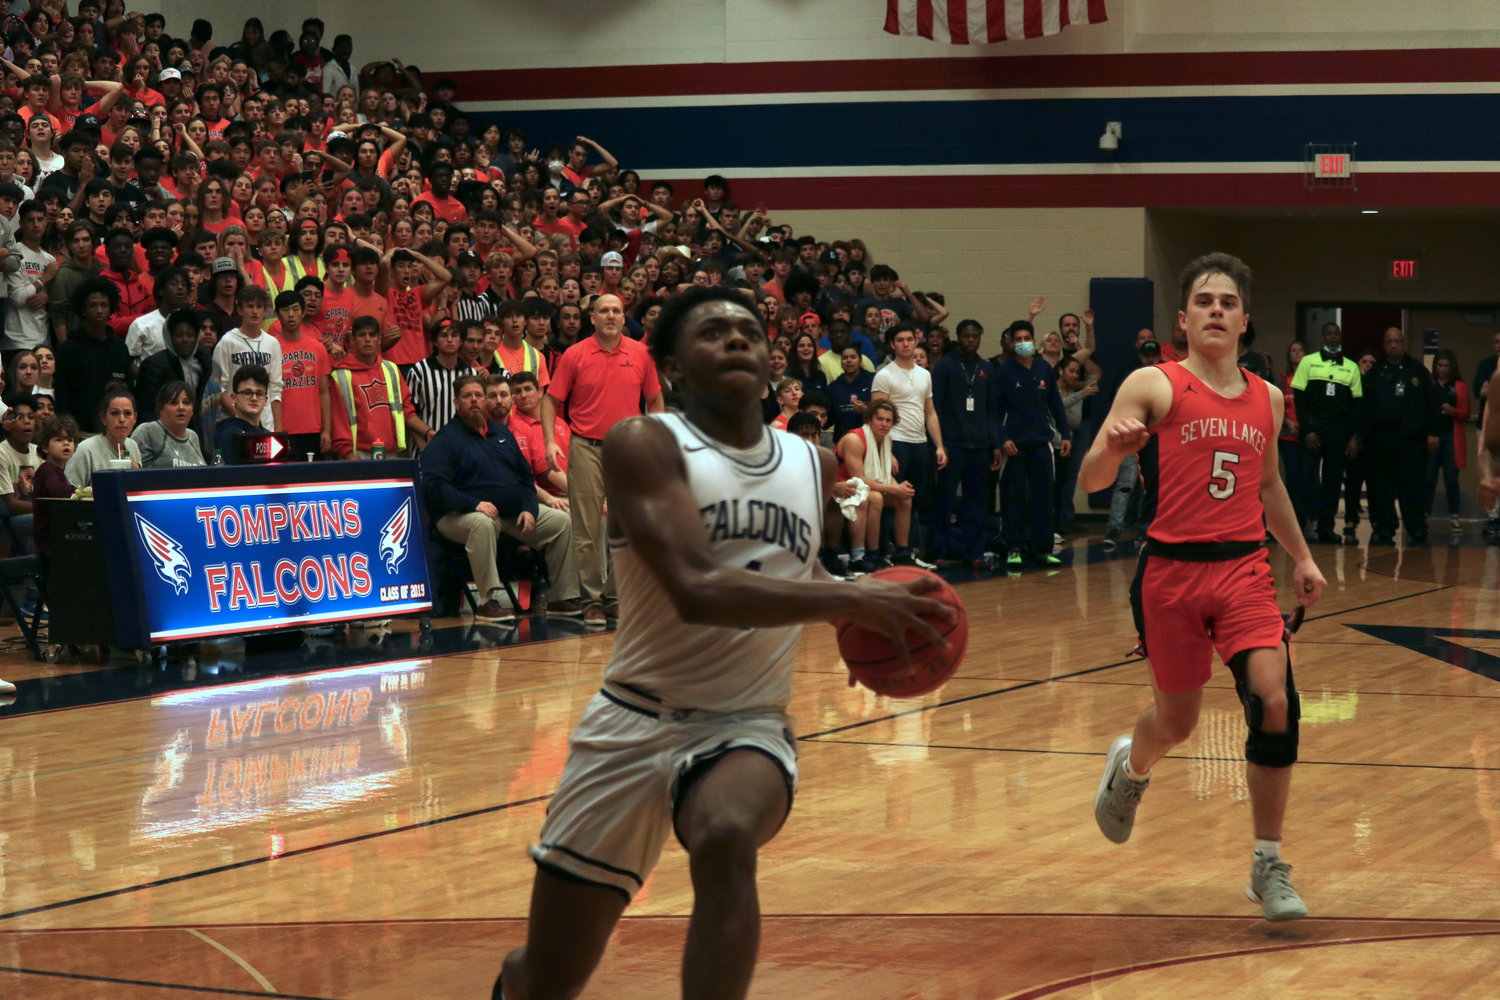 Tompkins’ Carmelo Yakubu drives to the basket during Wednesday’s game against Seven Lakesat the Tompkins gym.